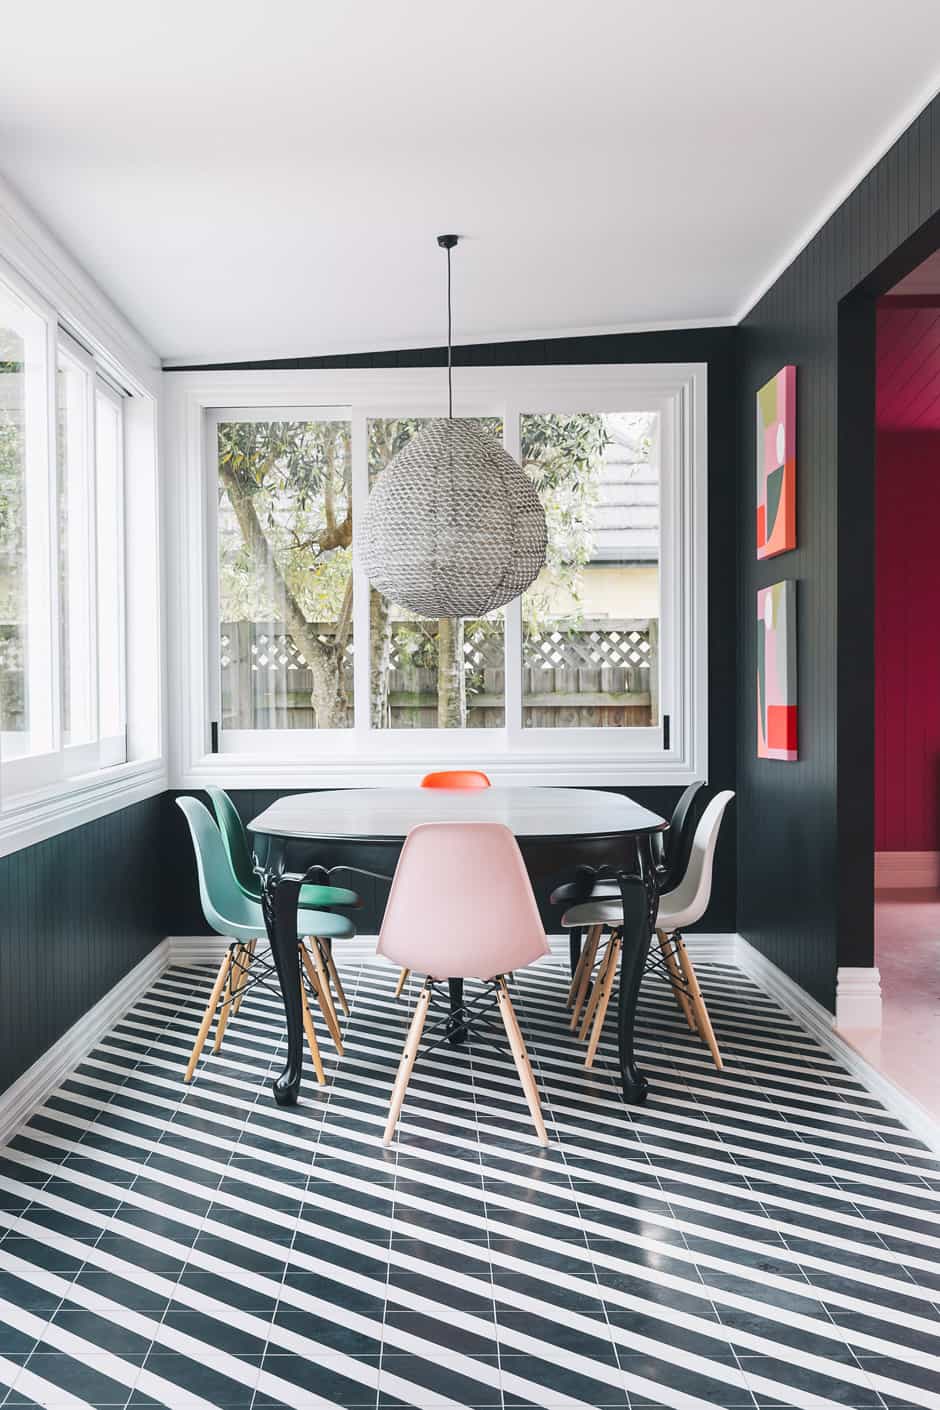 DINING A pendant light by Paris au Mois d’Août from Madder & Rogue, Eames chairs, and a dining table found on Trade Me and painted in Dulux Blackwood Bay (the same shade as the walls) are complemented by Alex’s own artworks, The Twins. She and Daisy are pictured opposite.